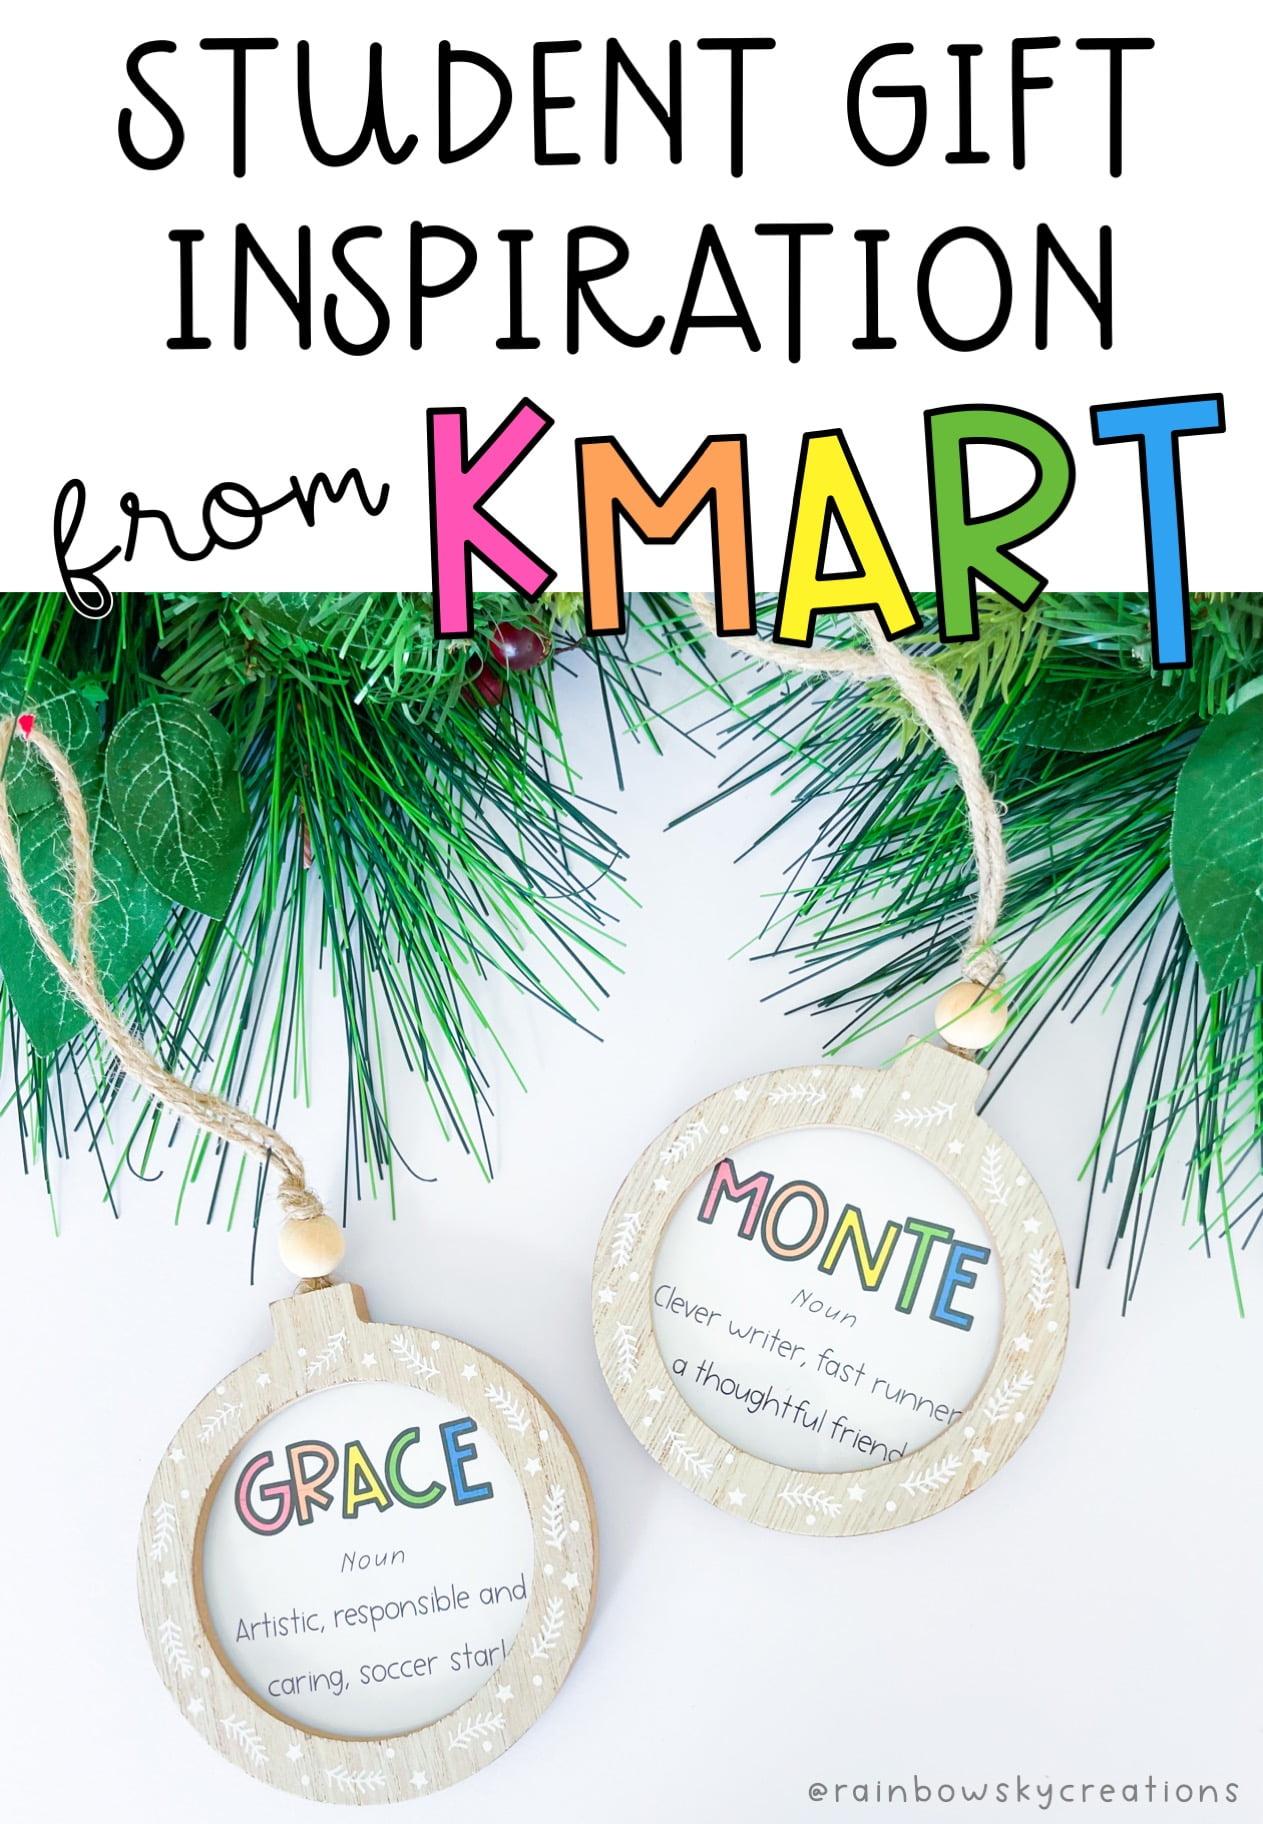 Student Gift Inspo From Kmart - Rainbow Sky Creations